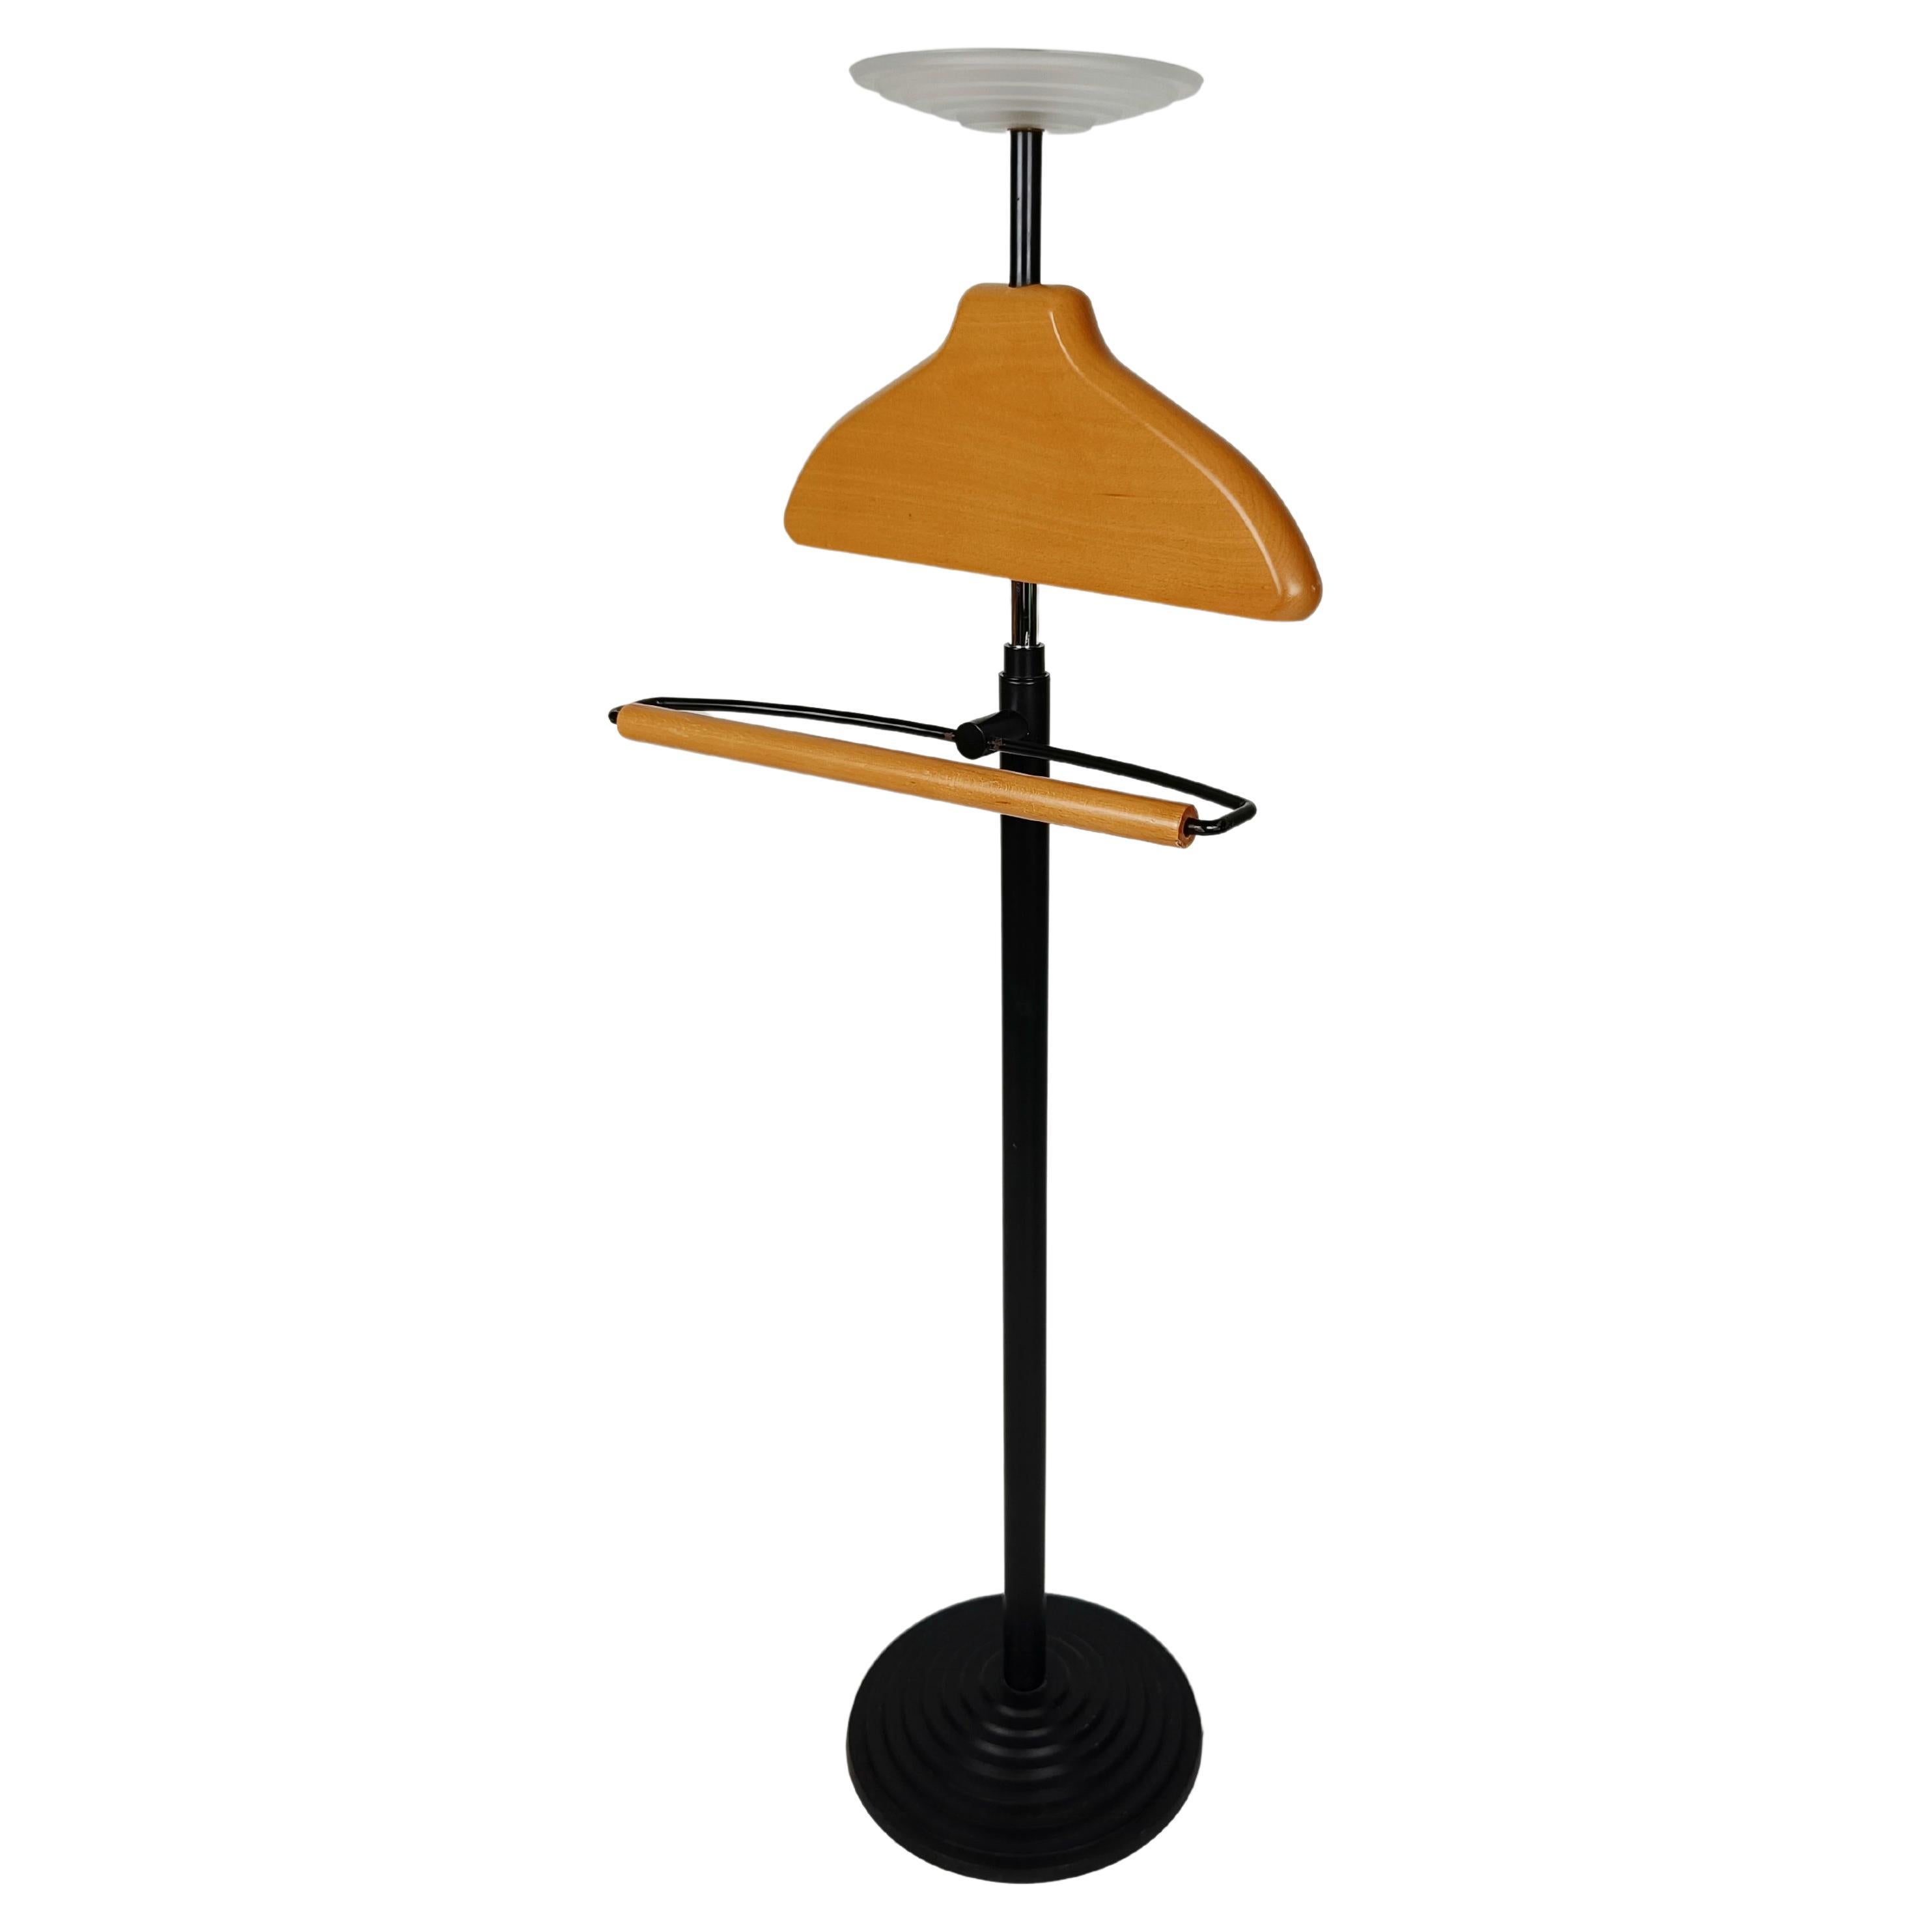 Italian Post Modern Valet Stand by Fontana Arte Made in Glass, Metal and Beech